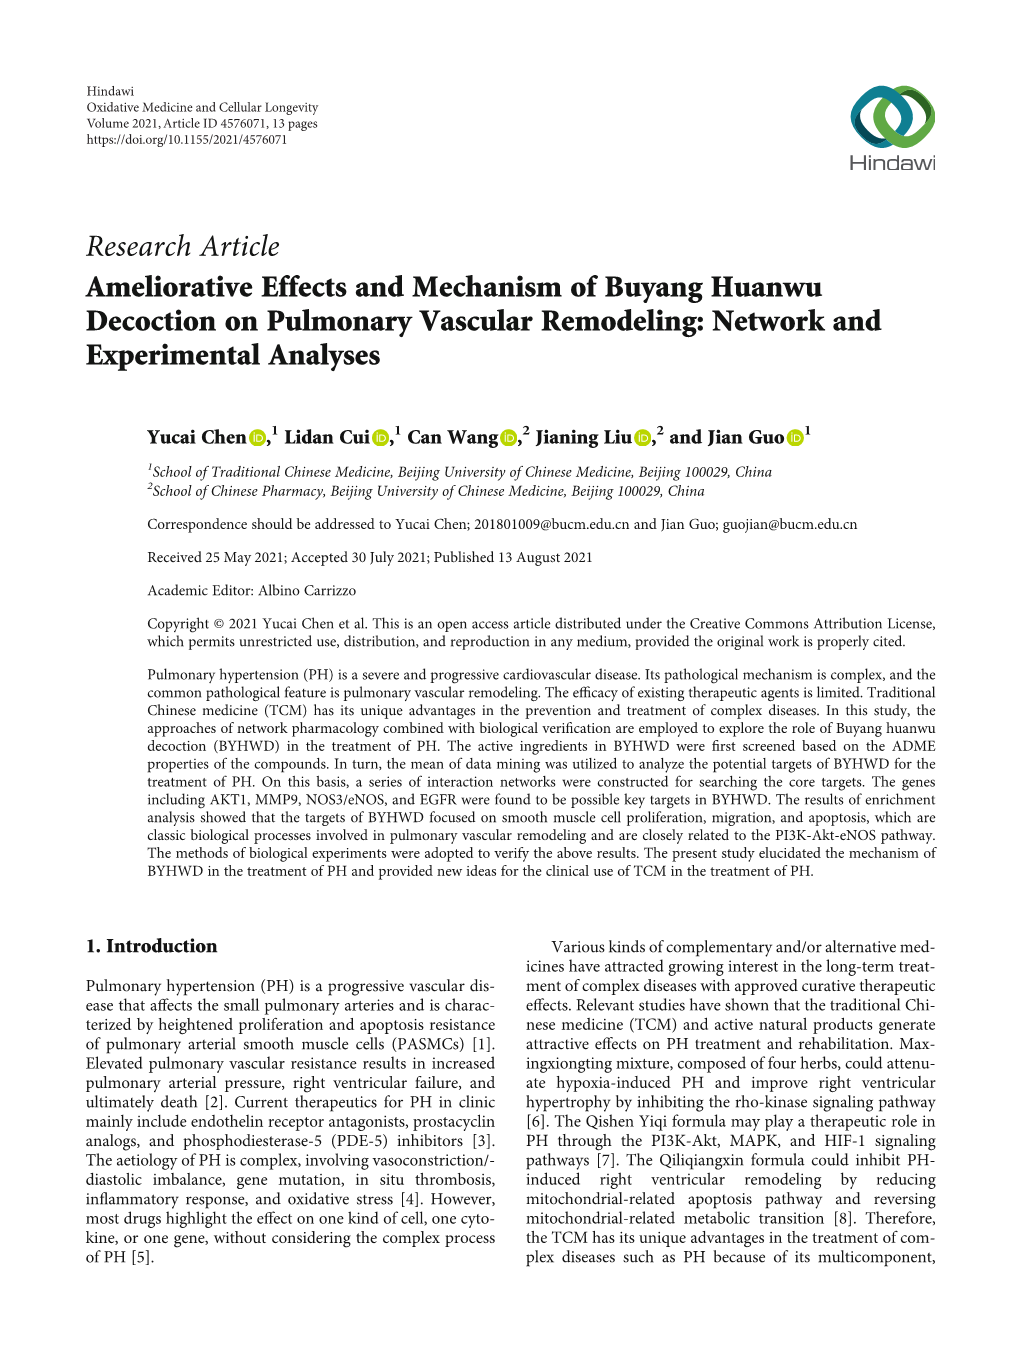 Ameliorative Effects and Mechanism of Buyang Huanwu Decoction on Pulmonary Vascular Remodeling: Network and Experimental Analyses